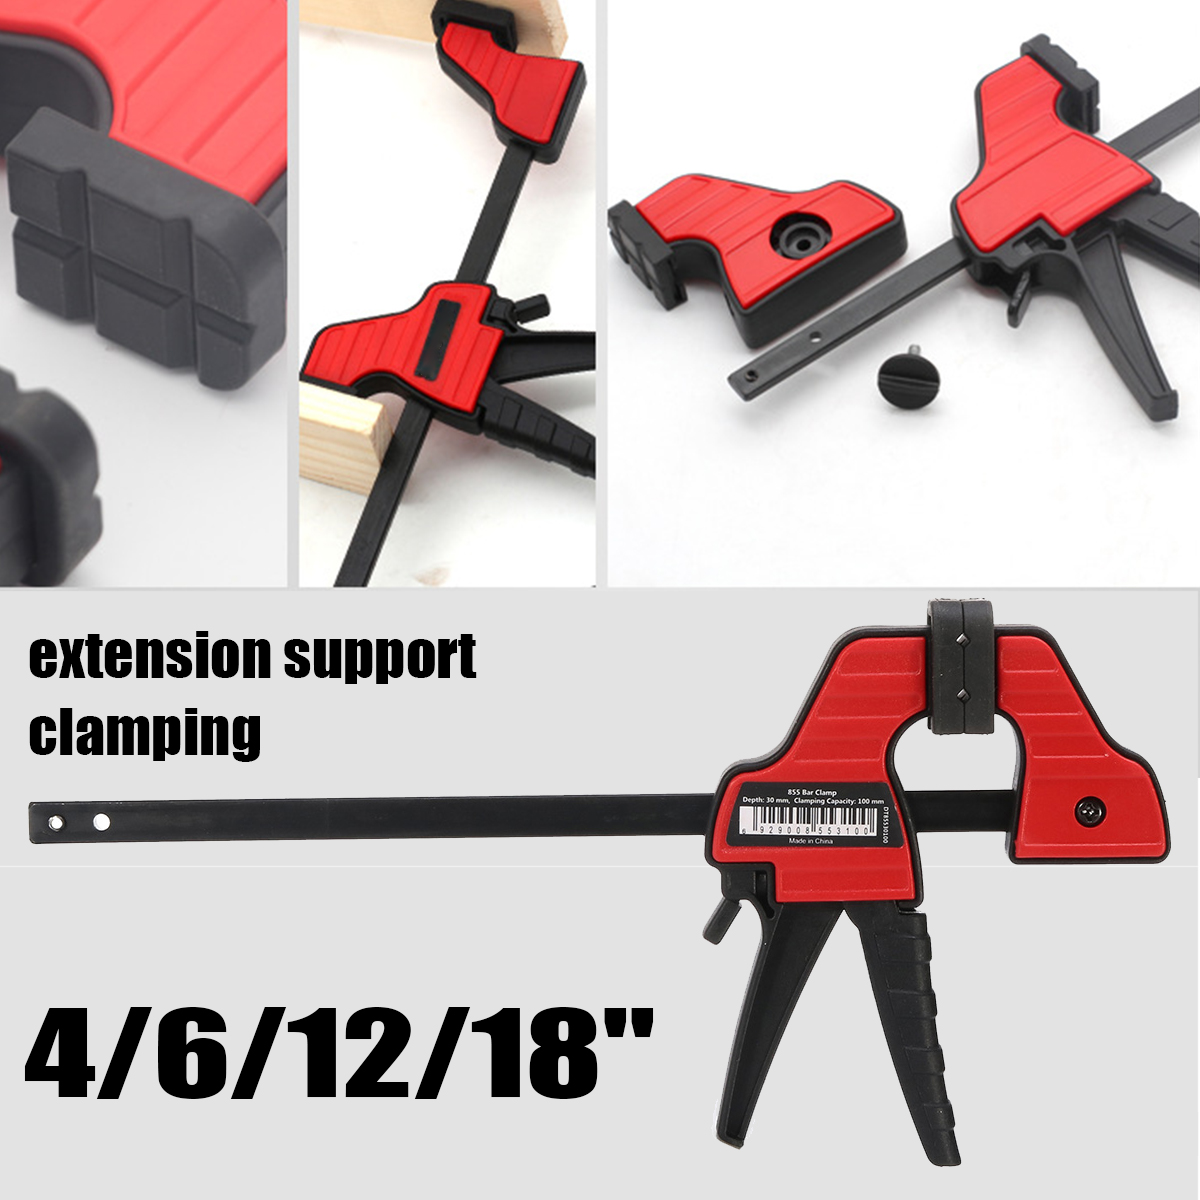 461218-Inch-Plastic-F-Clamp-Heavy-Duty-Holder-Quick-Release-Parallel-Wood-Tool-Woodworking-Clamp-1437237-9